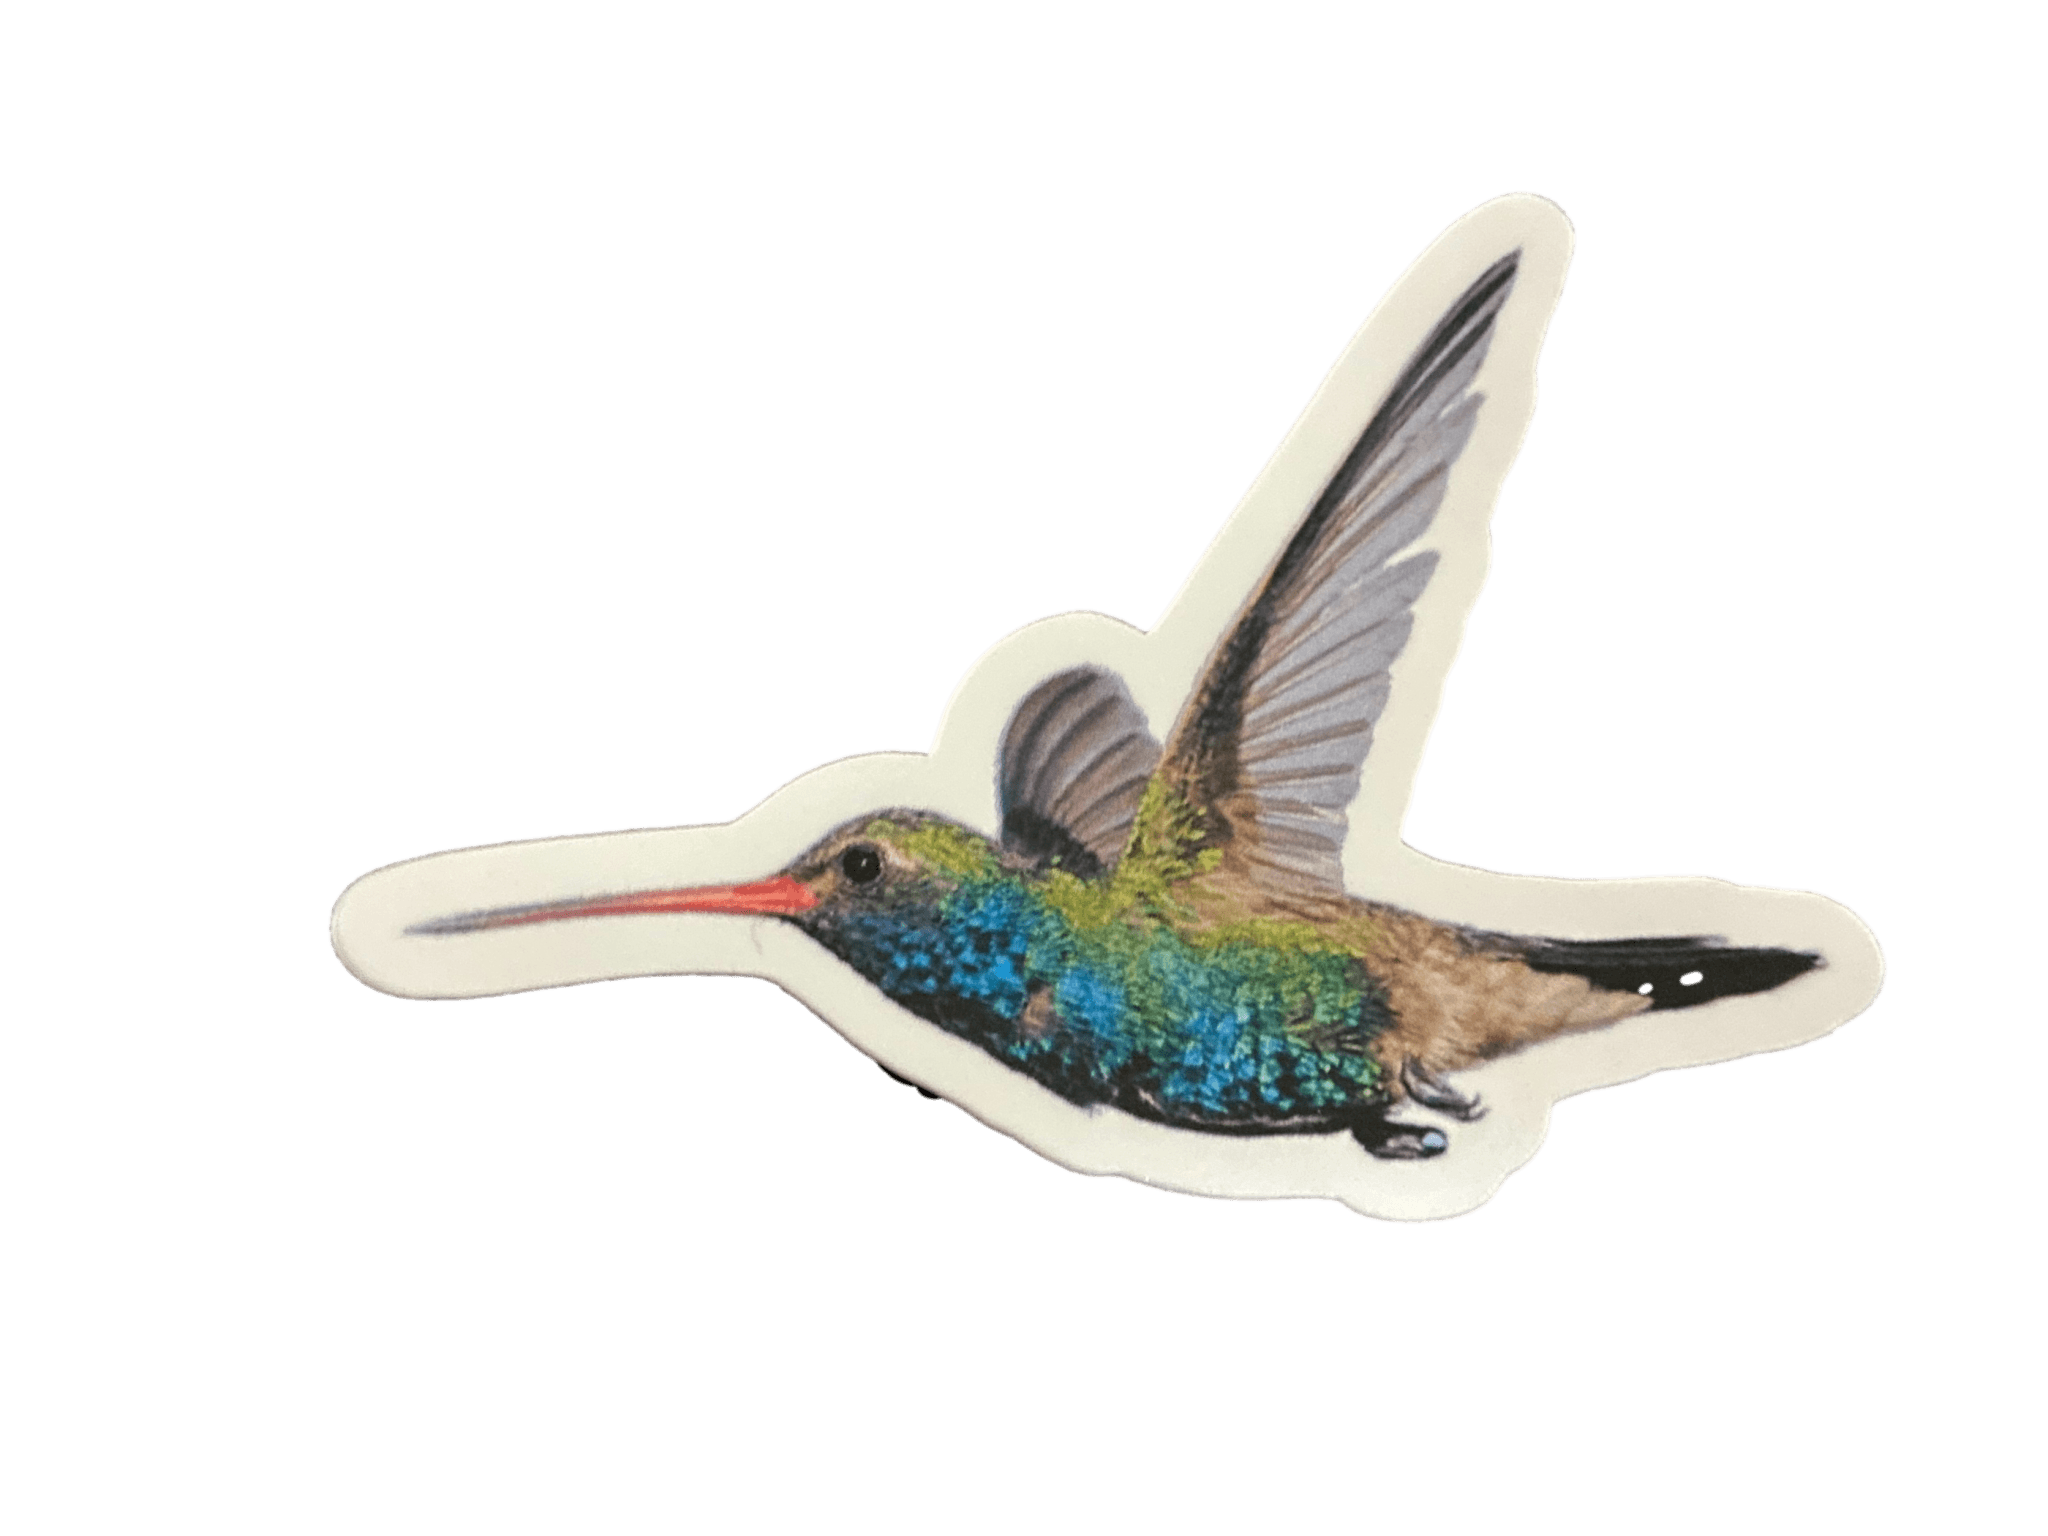 Stickers 3 in. Hummingbird Themed High Quality PVC Vinyl Decorative Water-Resistant Glossy UV Resistant - Ysleta Mission Gift Shop- VOTED El Paso's Best Gift Shop